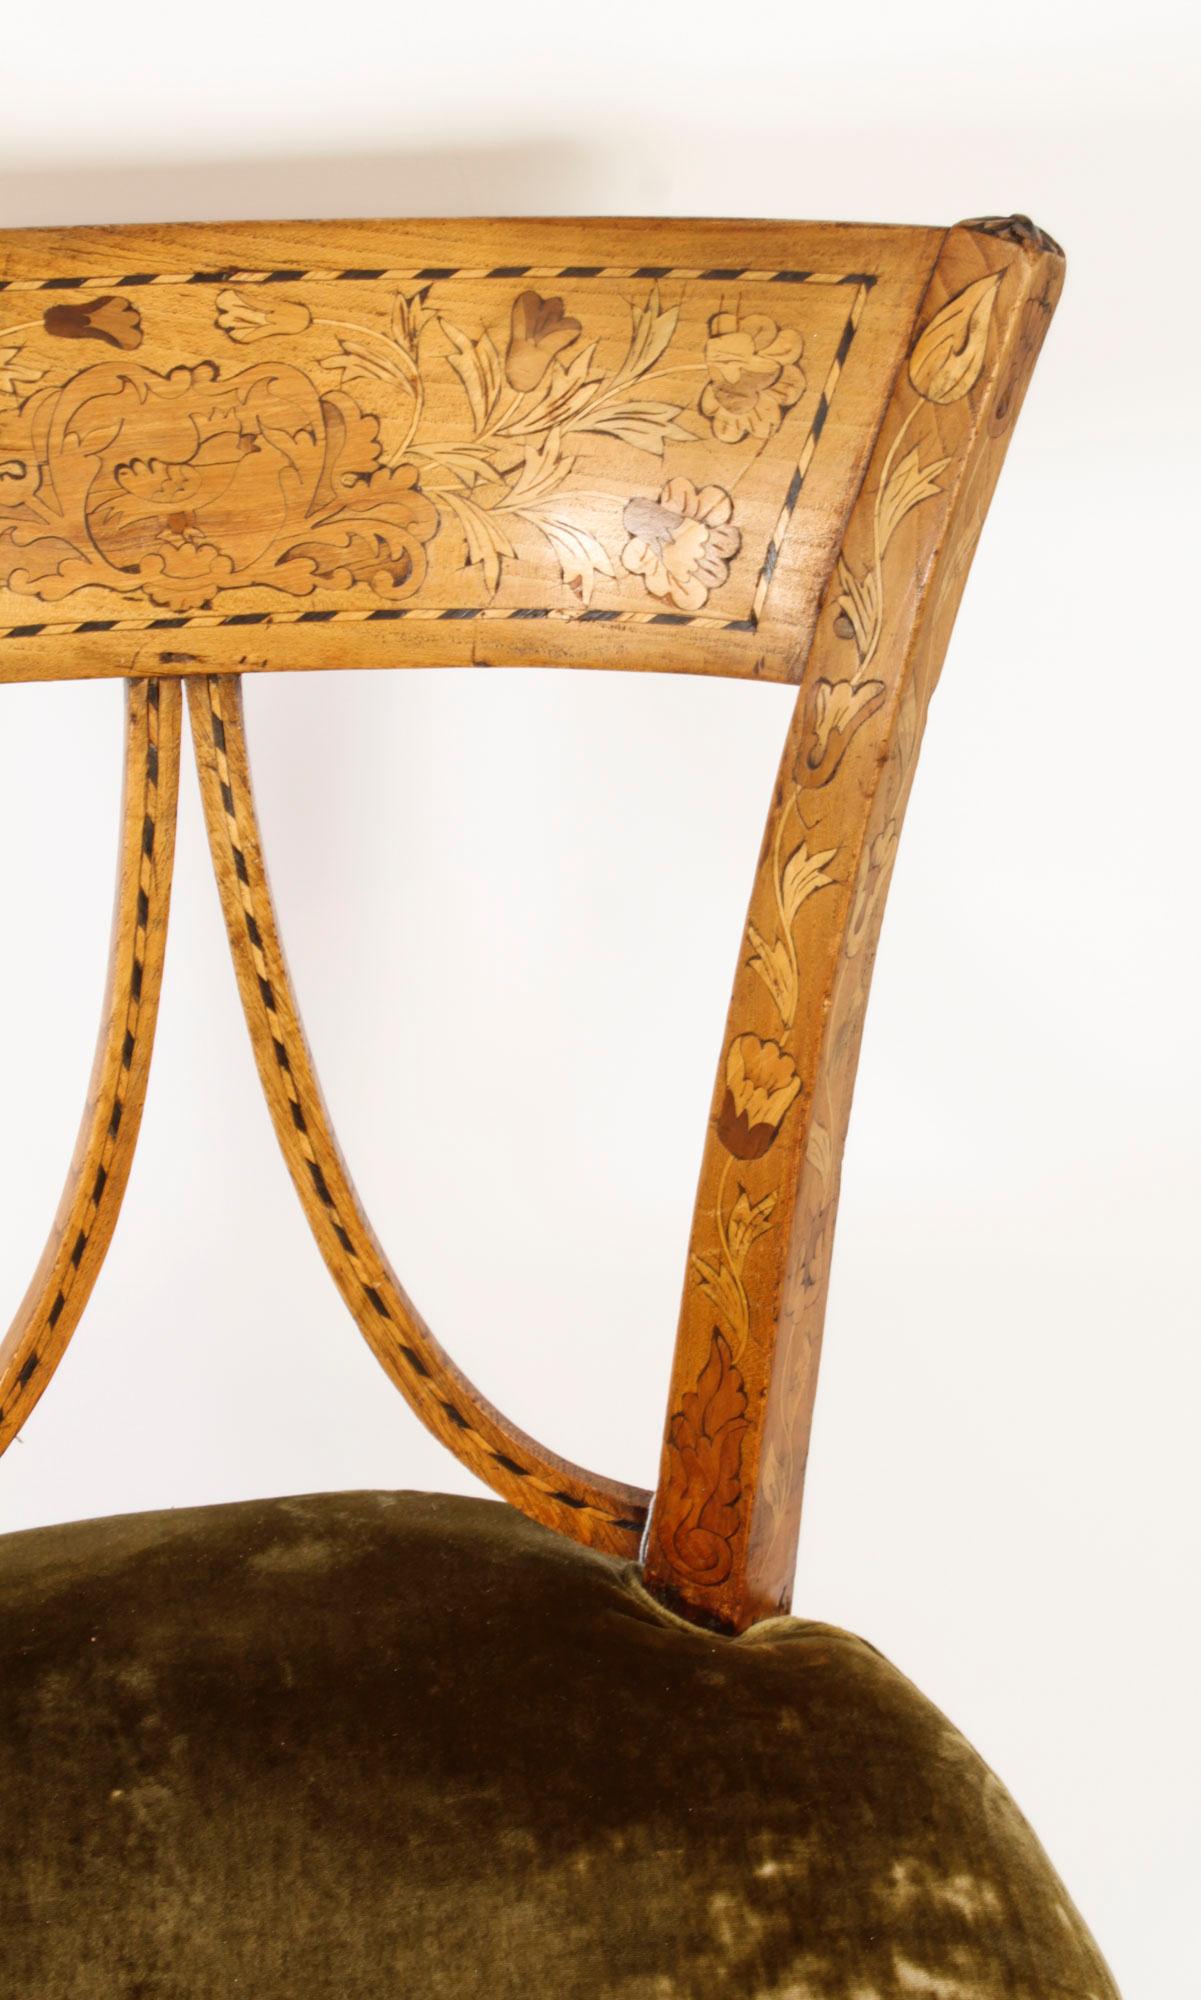 Mid-19th Century Antique Dutch Satinwood Marquetry Desk Chair 19th Century For Sale